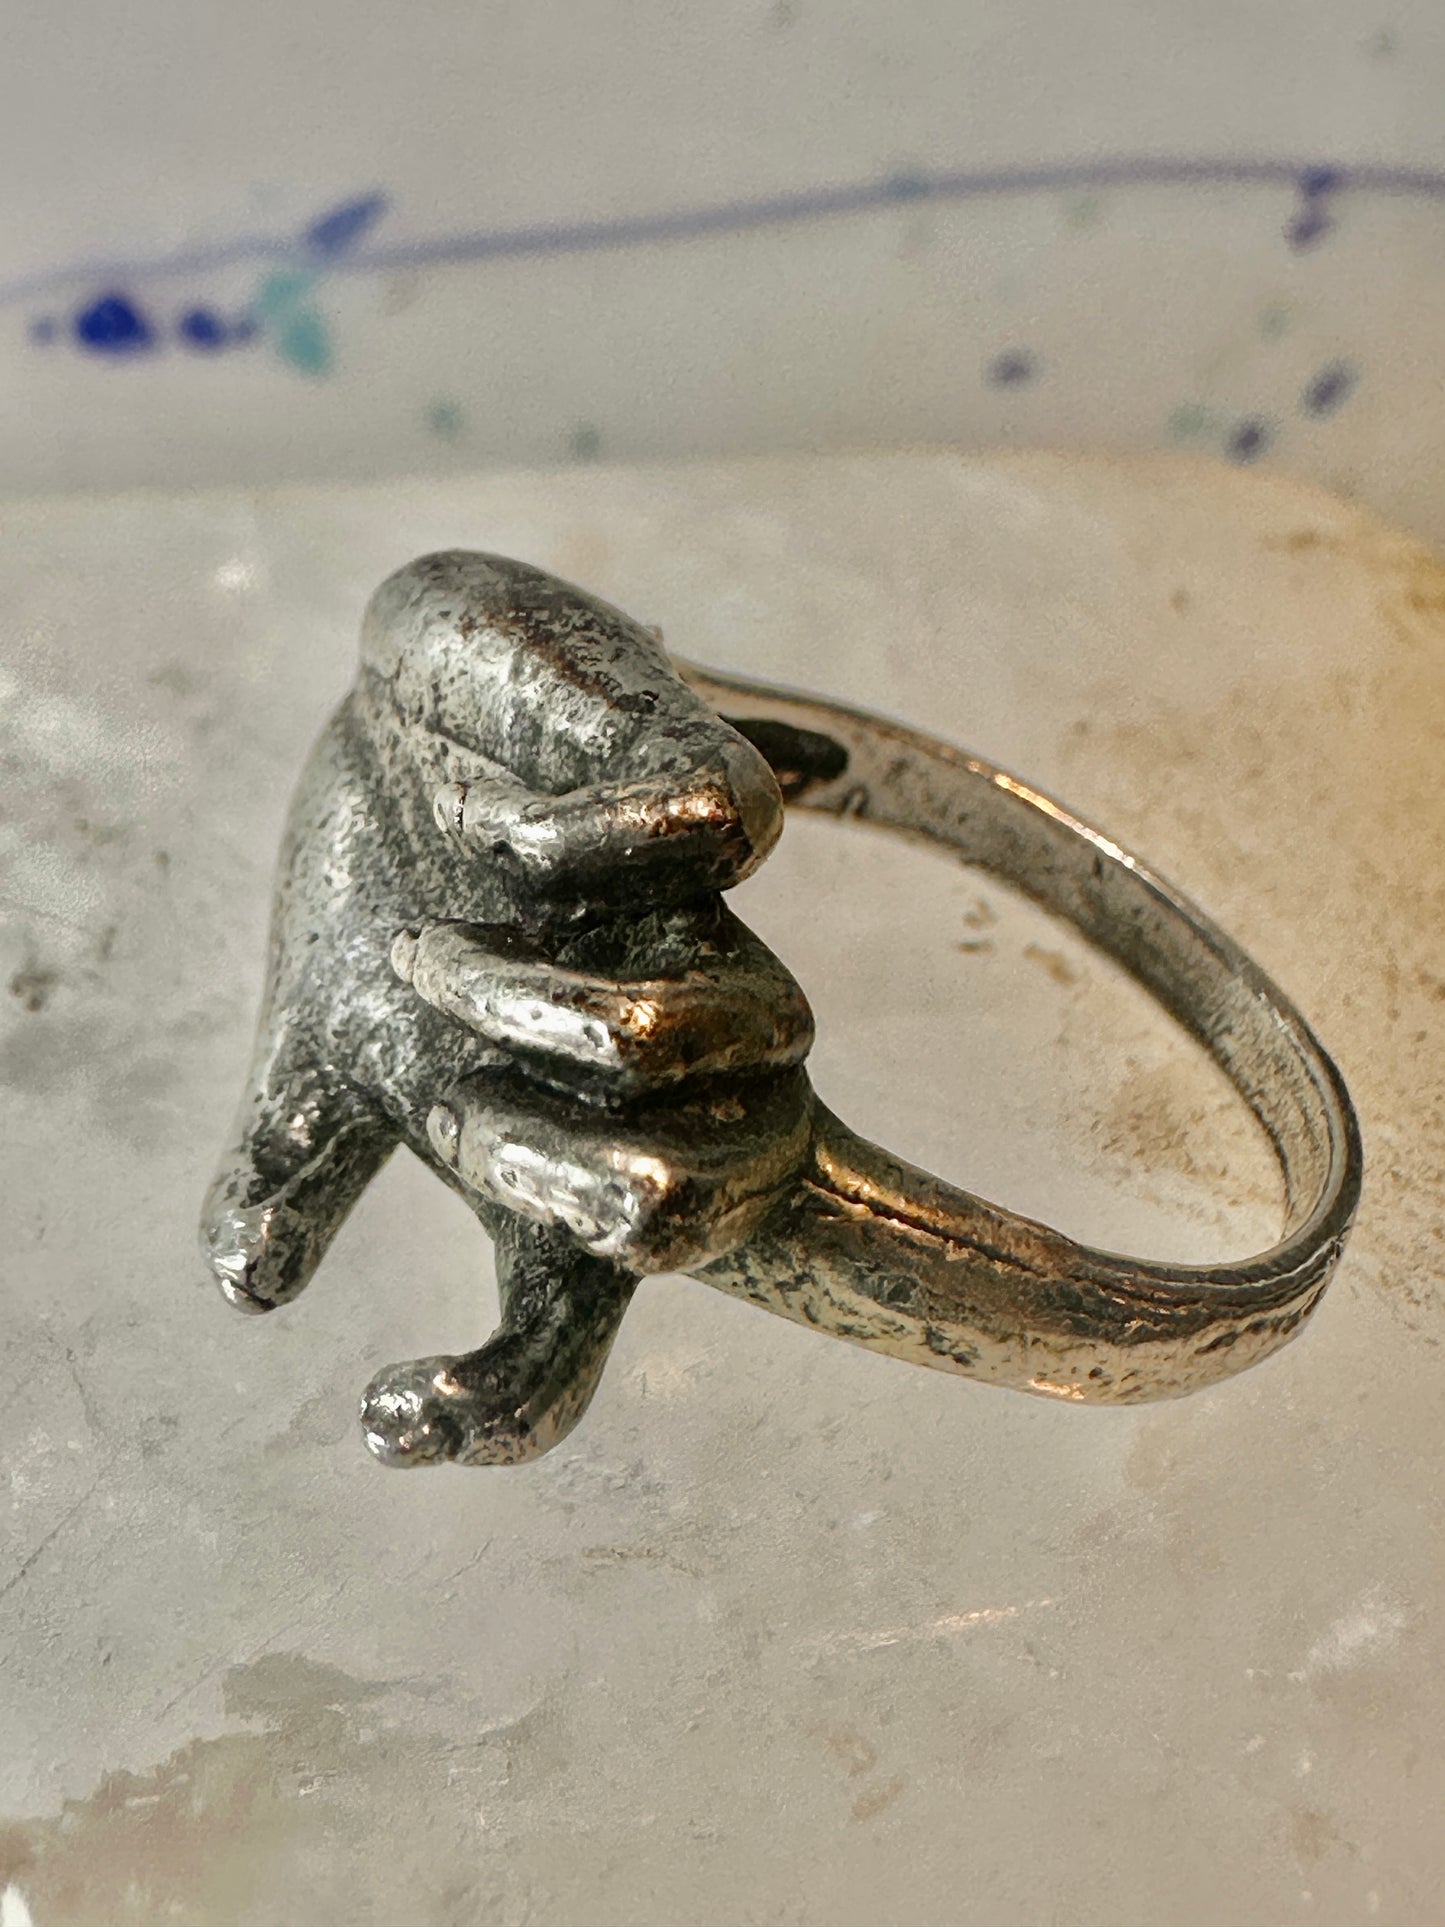 Hand ring figurative band size 5 sterling silver women vintage